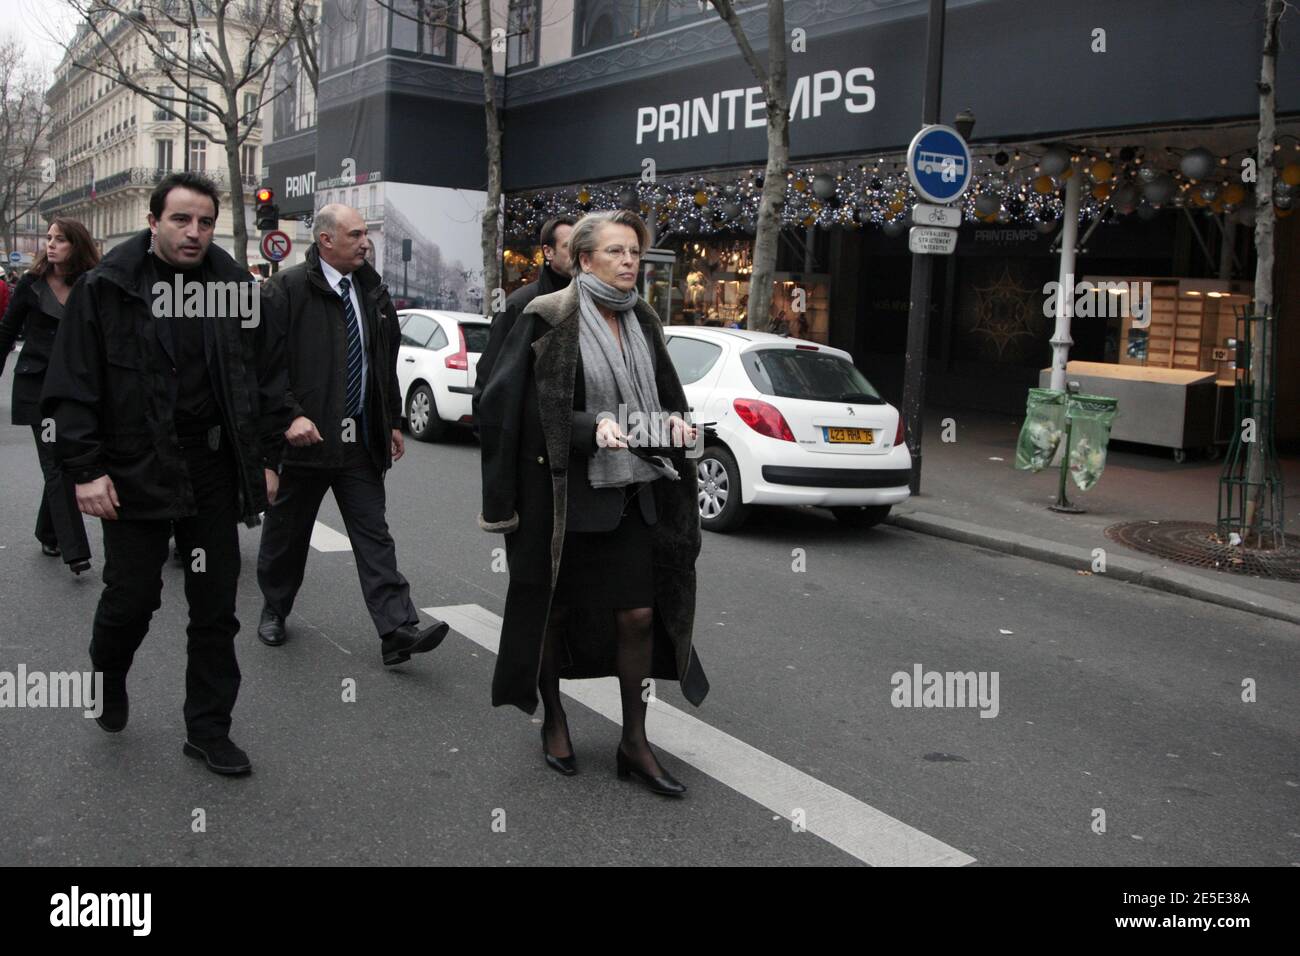 EXCLUSIVE - Minister of Interior Michele Alliot-Marie arriving at Printemps department store in Paris, France on December 16, 2008. Police neutralized explosives discovered in Printemps department store. Photo by ABACAPRESS.COM Stock Photo